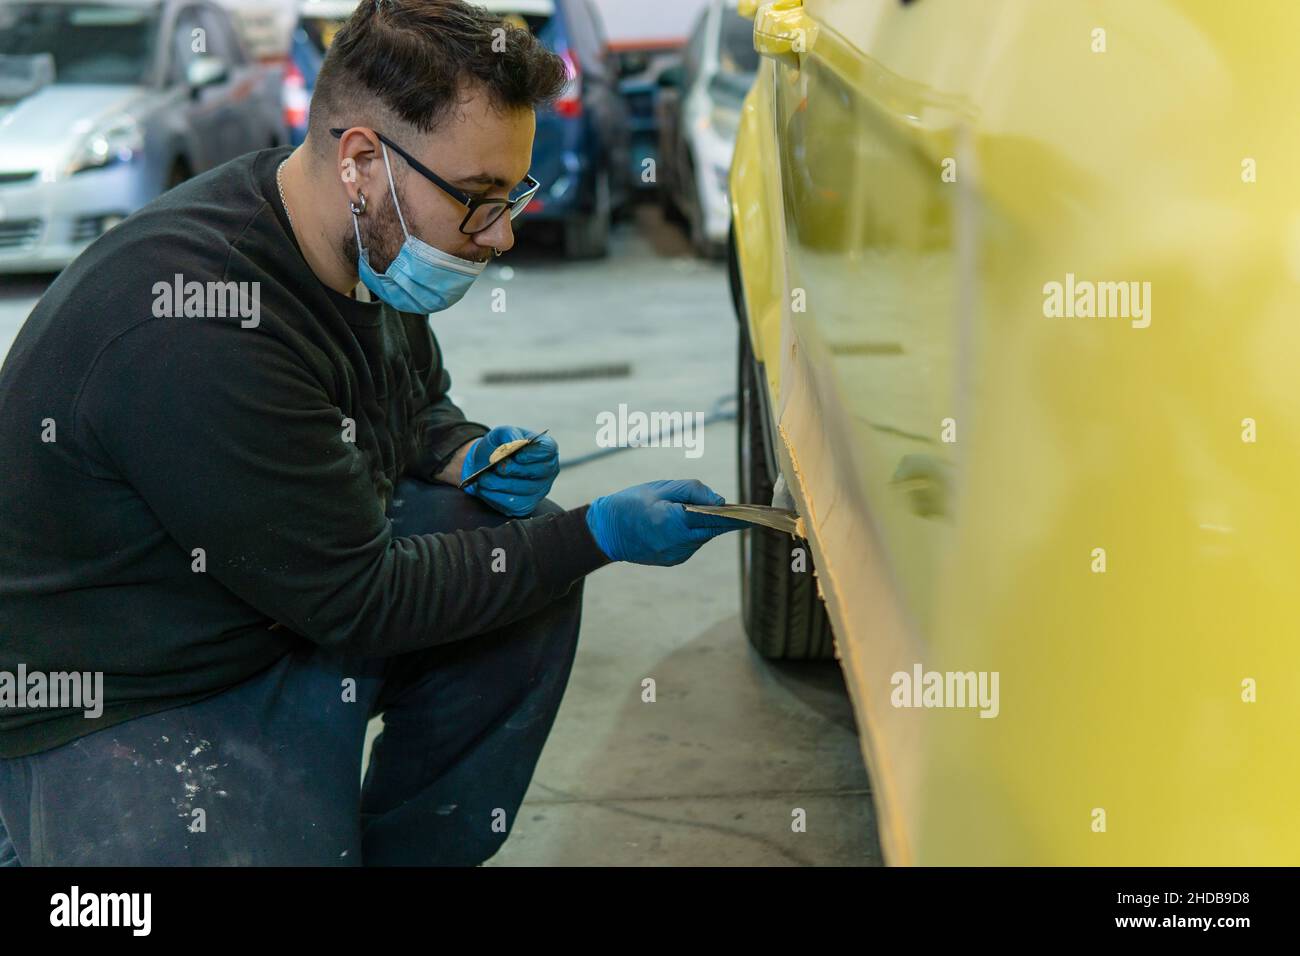 Auto Body Repair Seires Working On Putty Filler Stock Photo